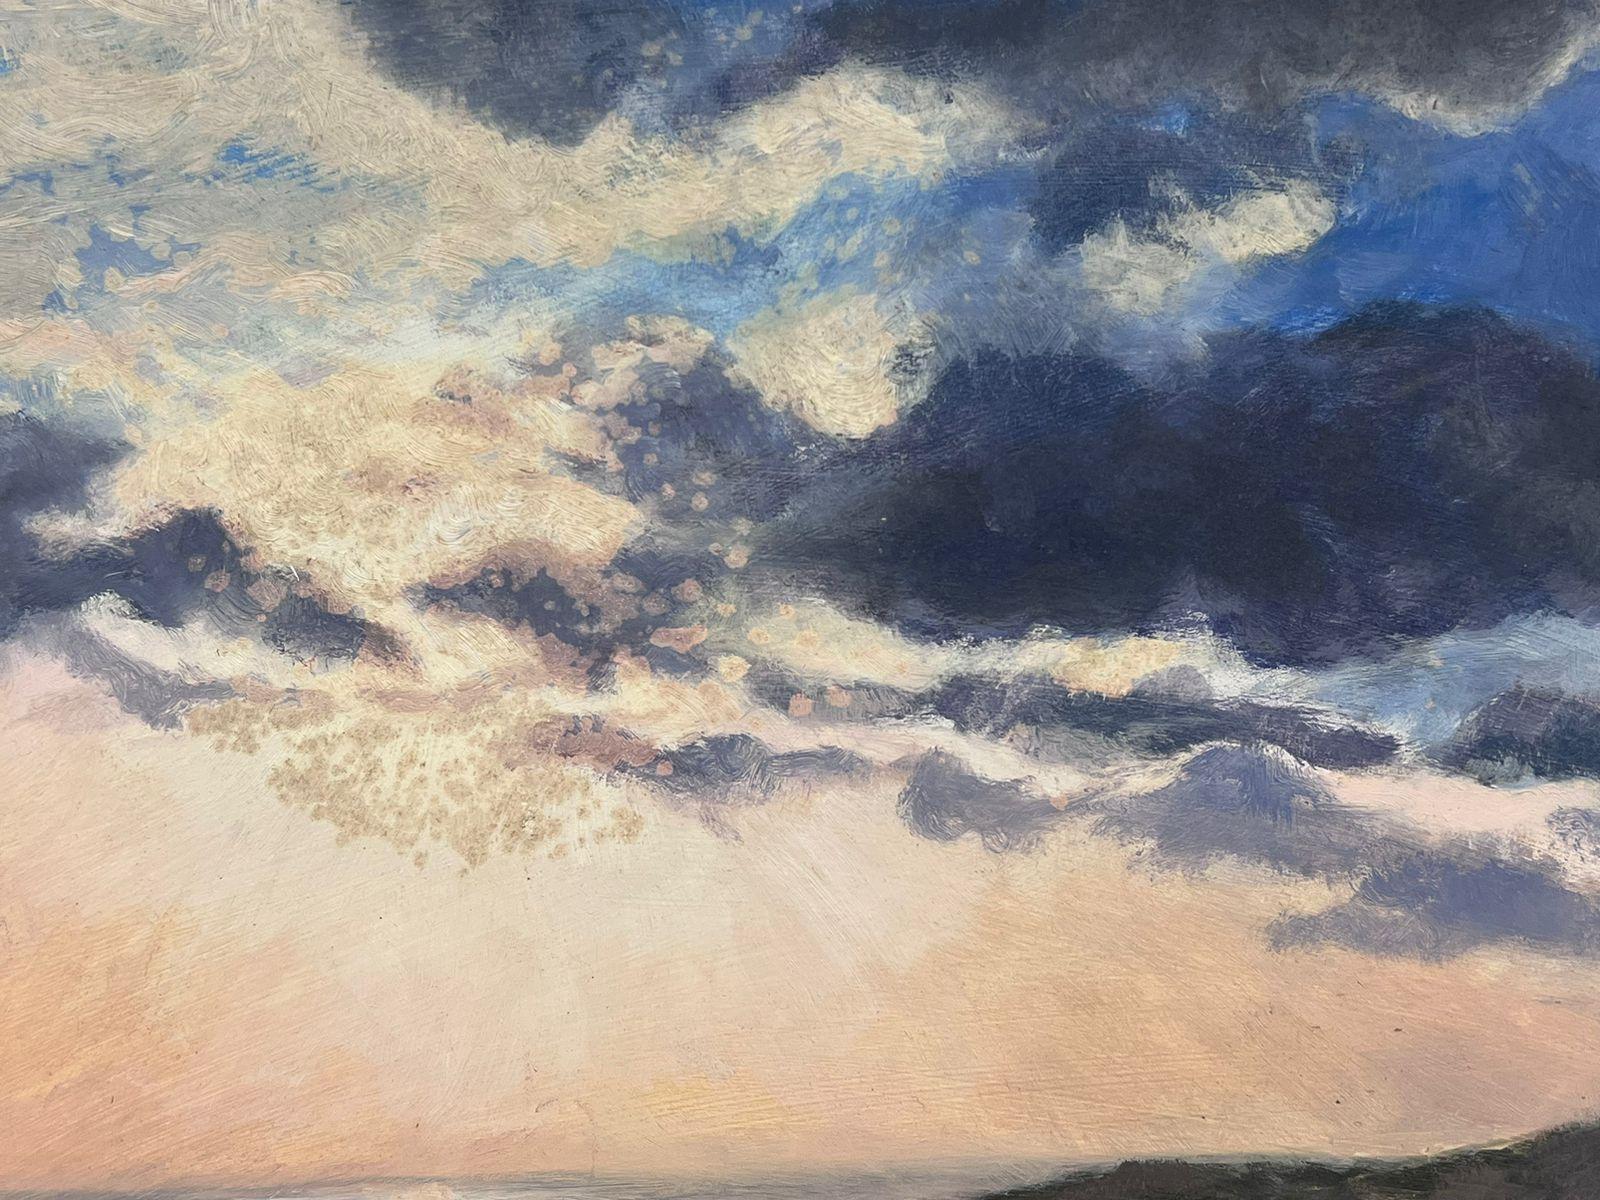 Brooding Skies
by Geza Somerset-Paddon (British 20th century)
oil painting on board, unframed
board: 10 x 16 inches
condition: overall very good
provenance: all the paintings we have by this artist have come from their studio sale in England. 